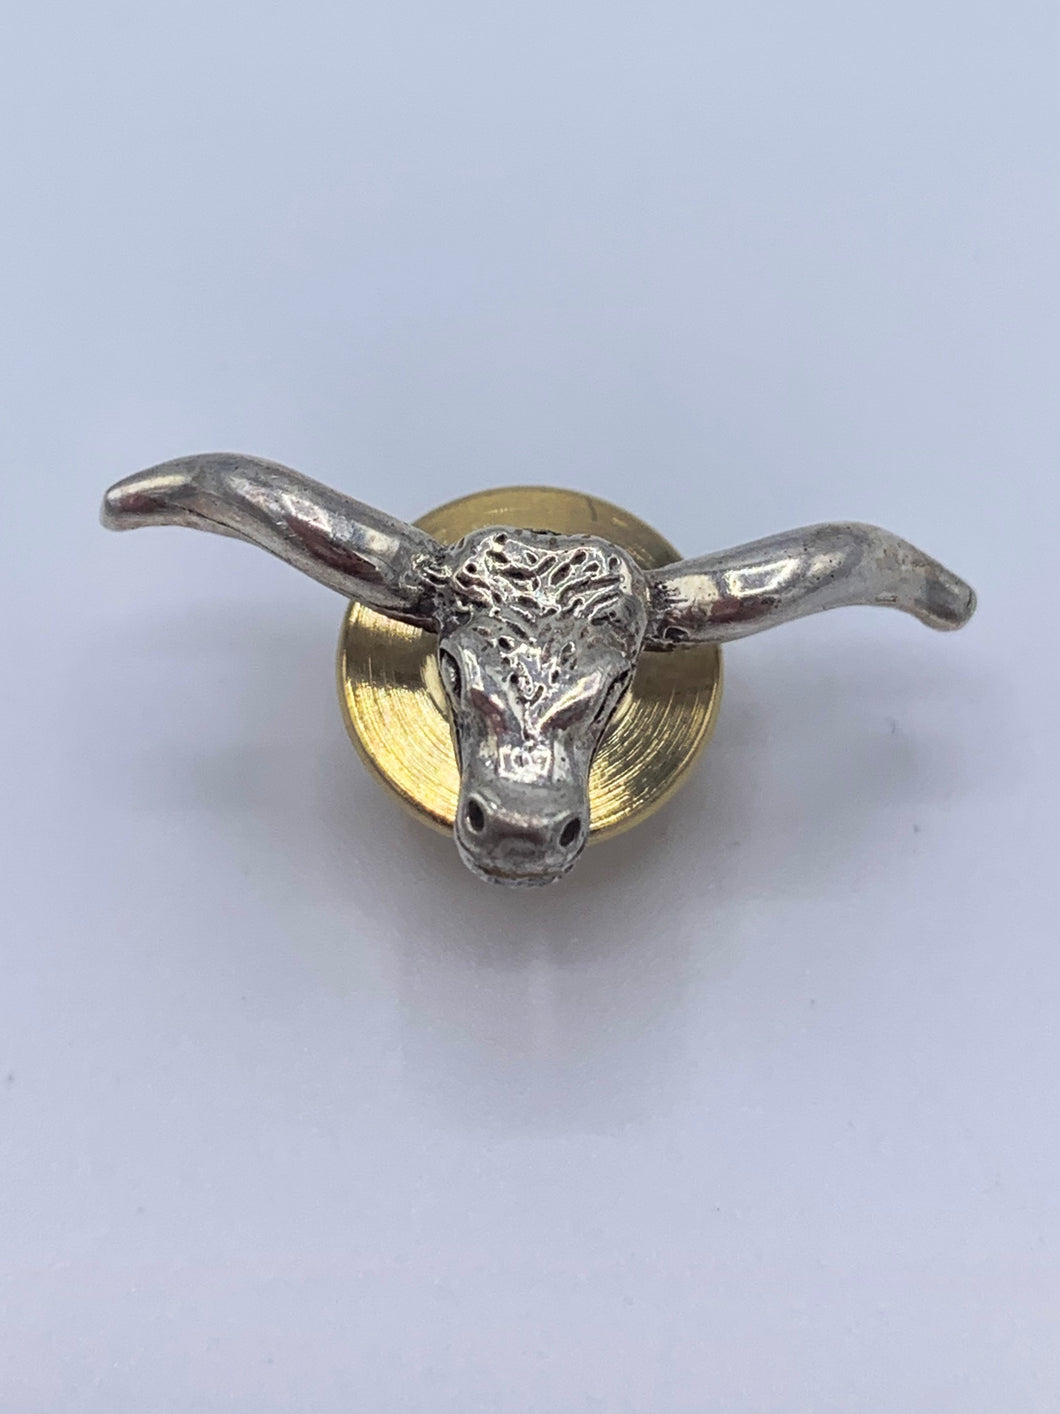 Sterling Silver Longhorn Tie Tack or Lapel Pin